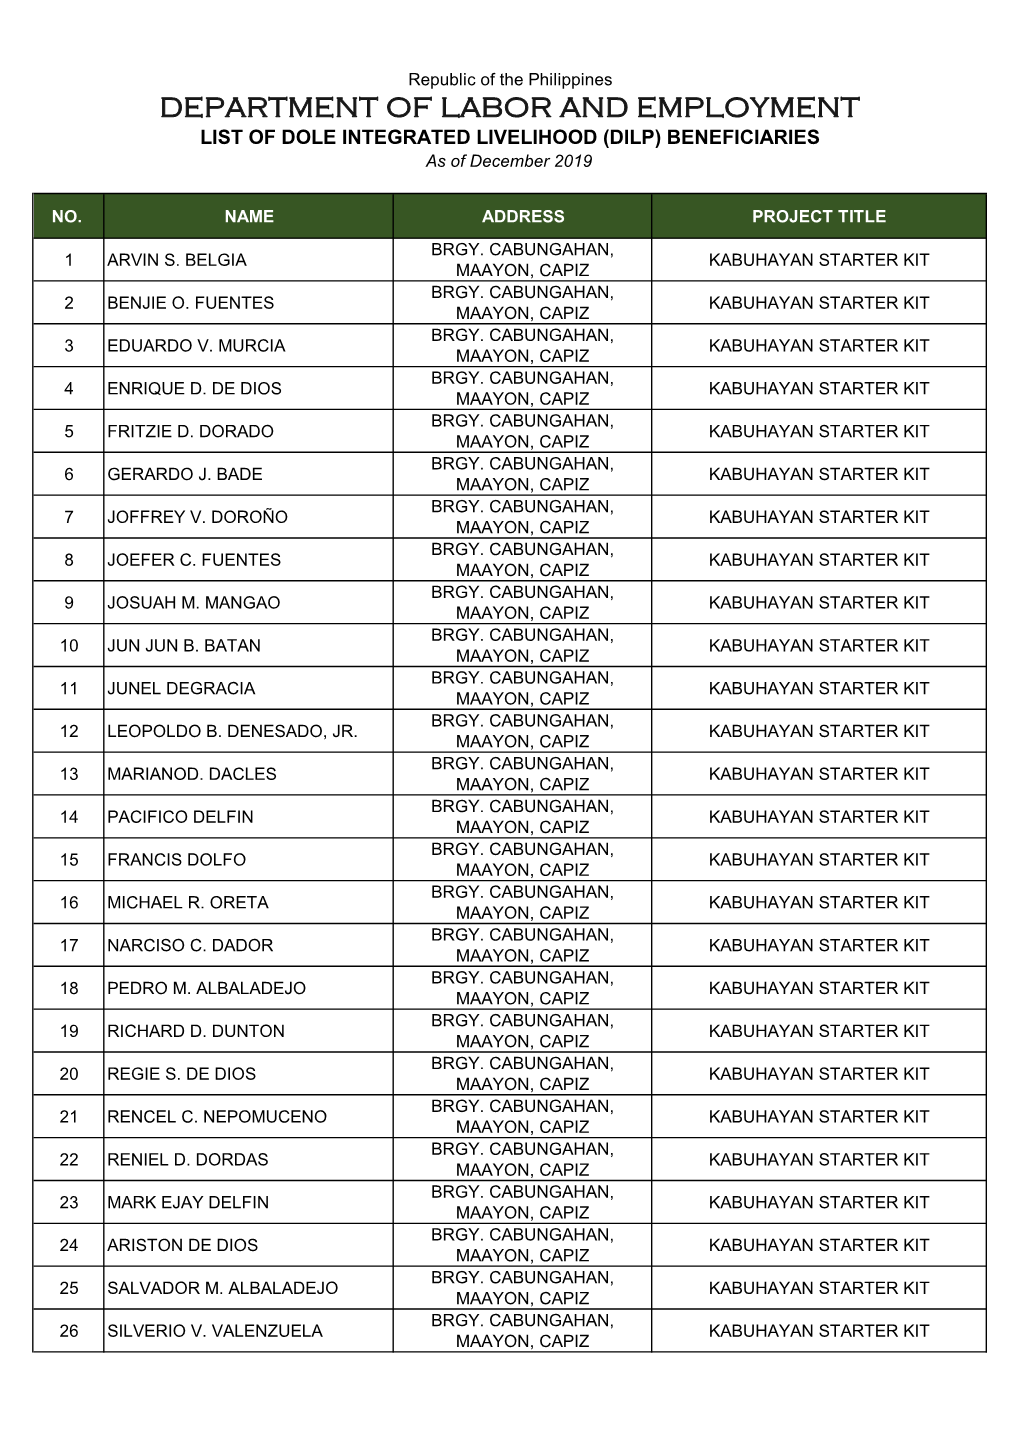 DEPARTMENT of LABOR and EMPLOYMENT LIST of DOLE INTEGRATED LIVELIHOOD (DILP) BENEFICIARIES As of December 2019